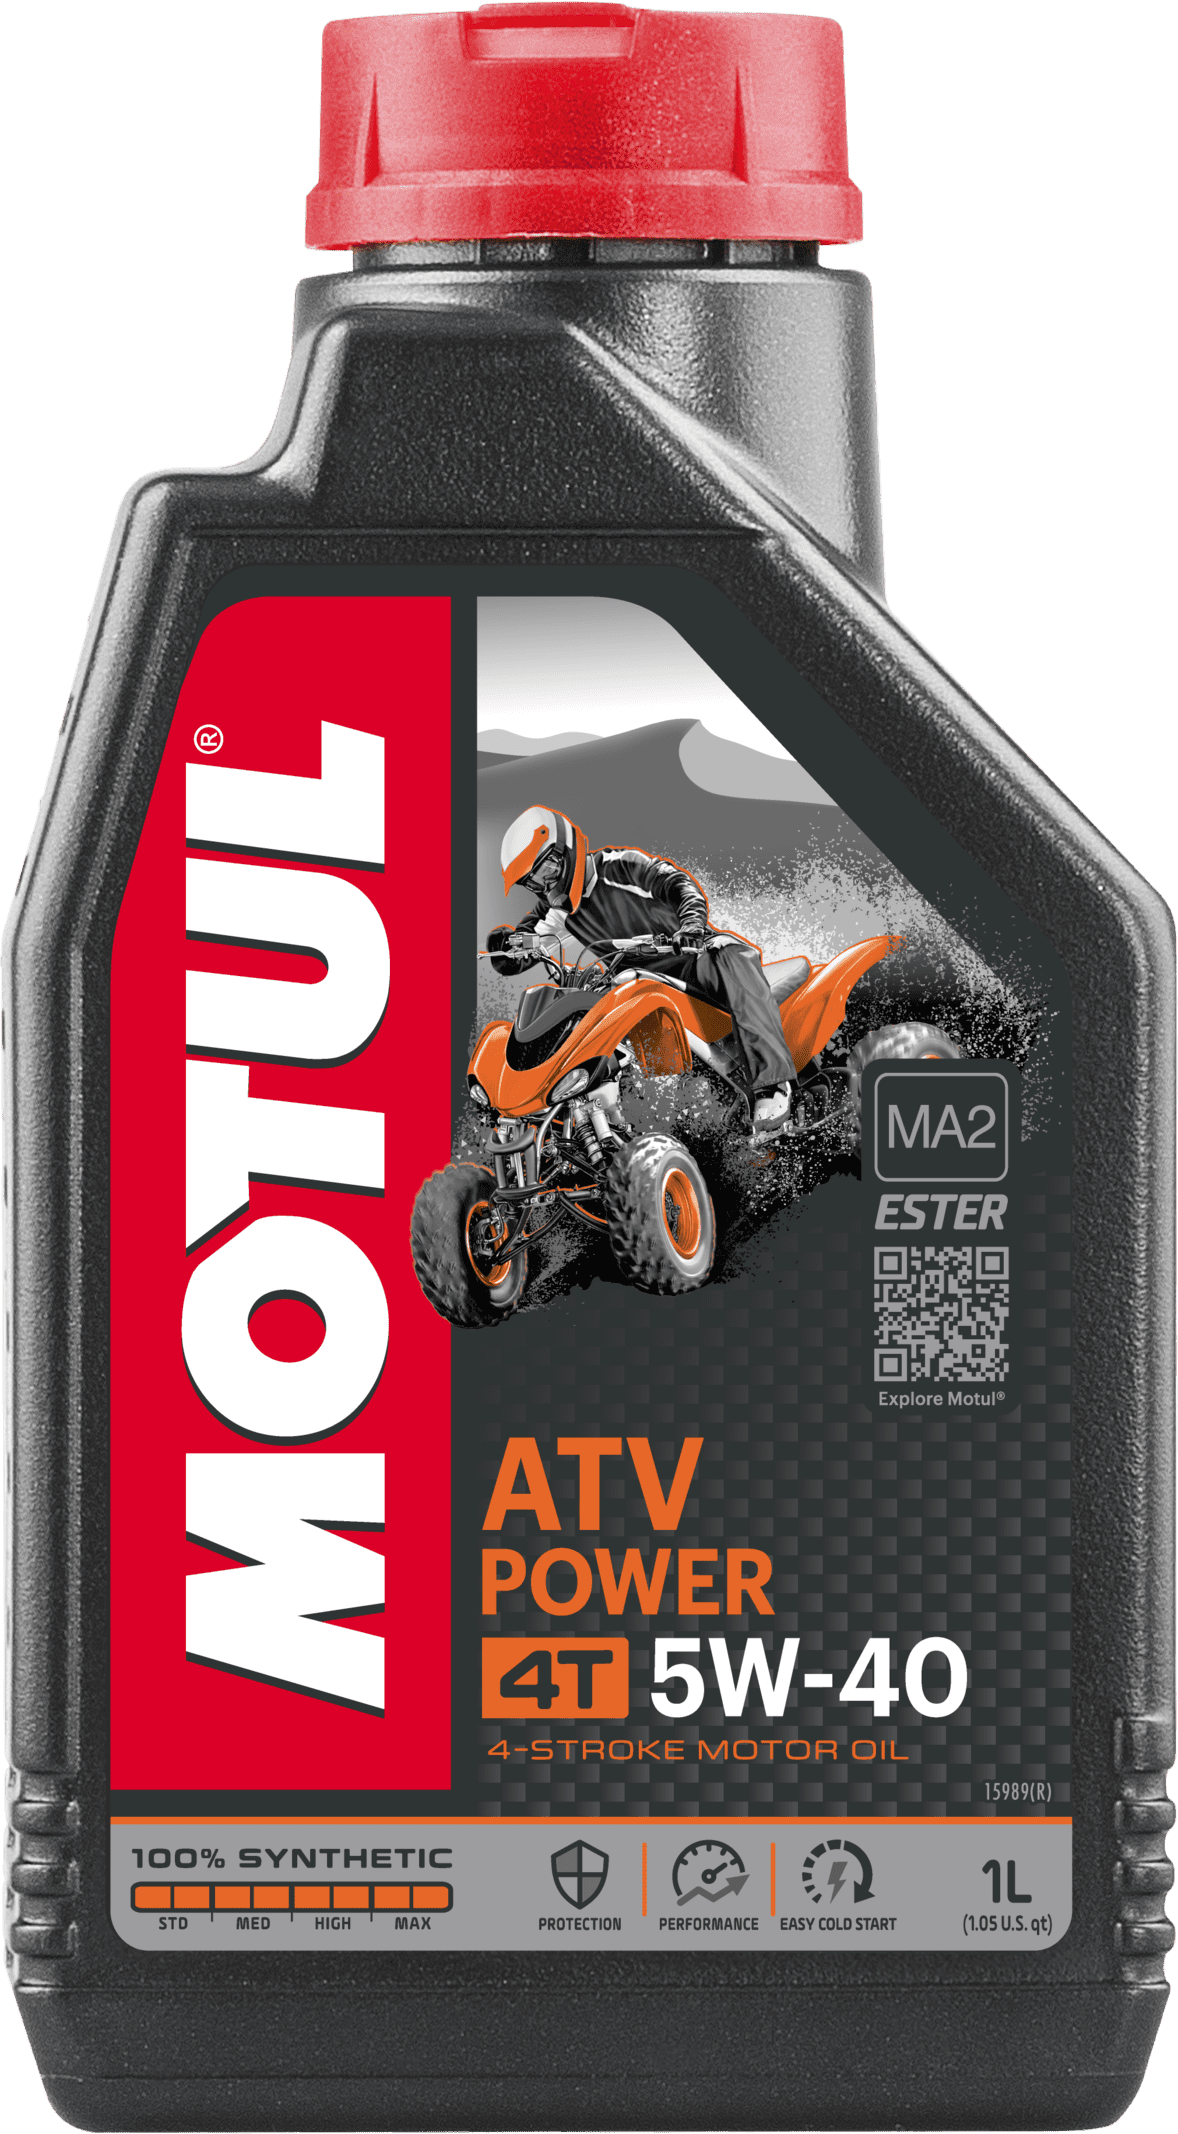 105897-1 100% Synthetic lubricant developed for the latest generation of powerful Sport and Recreational ATVs.